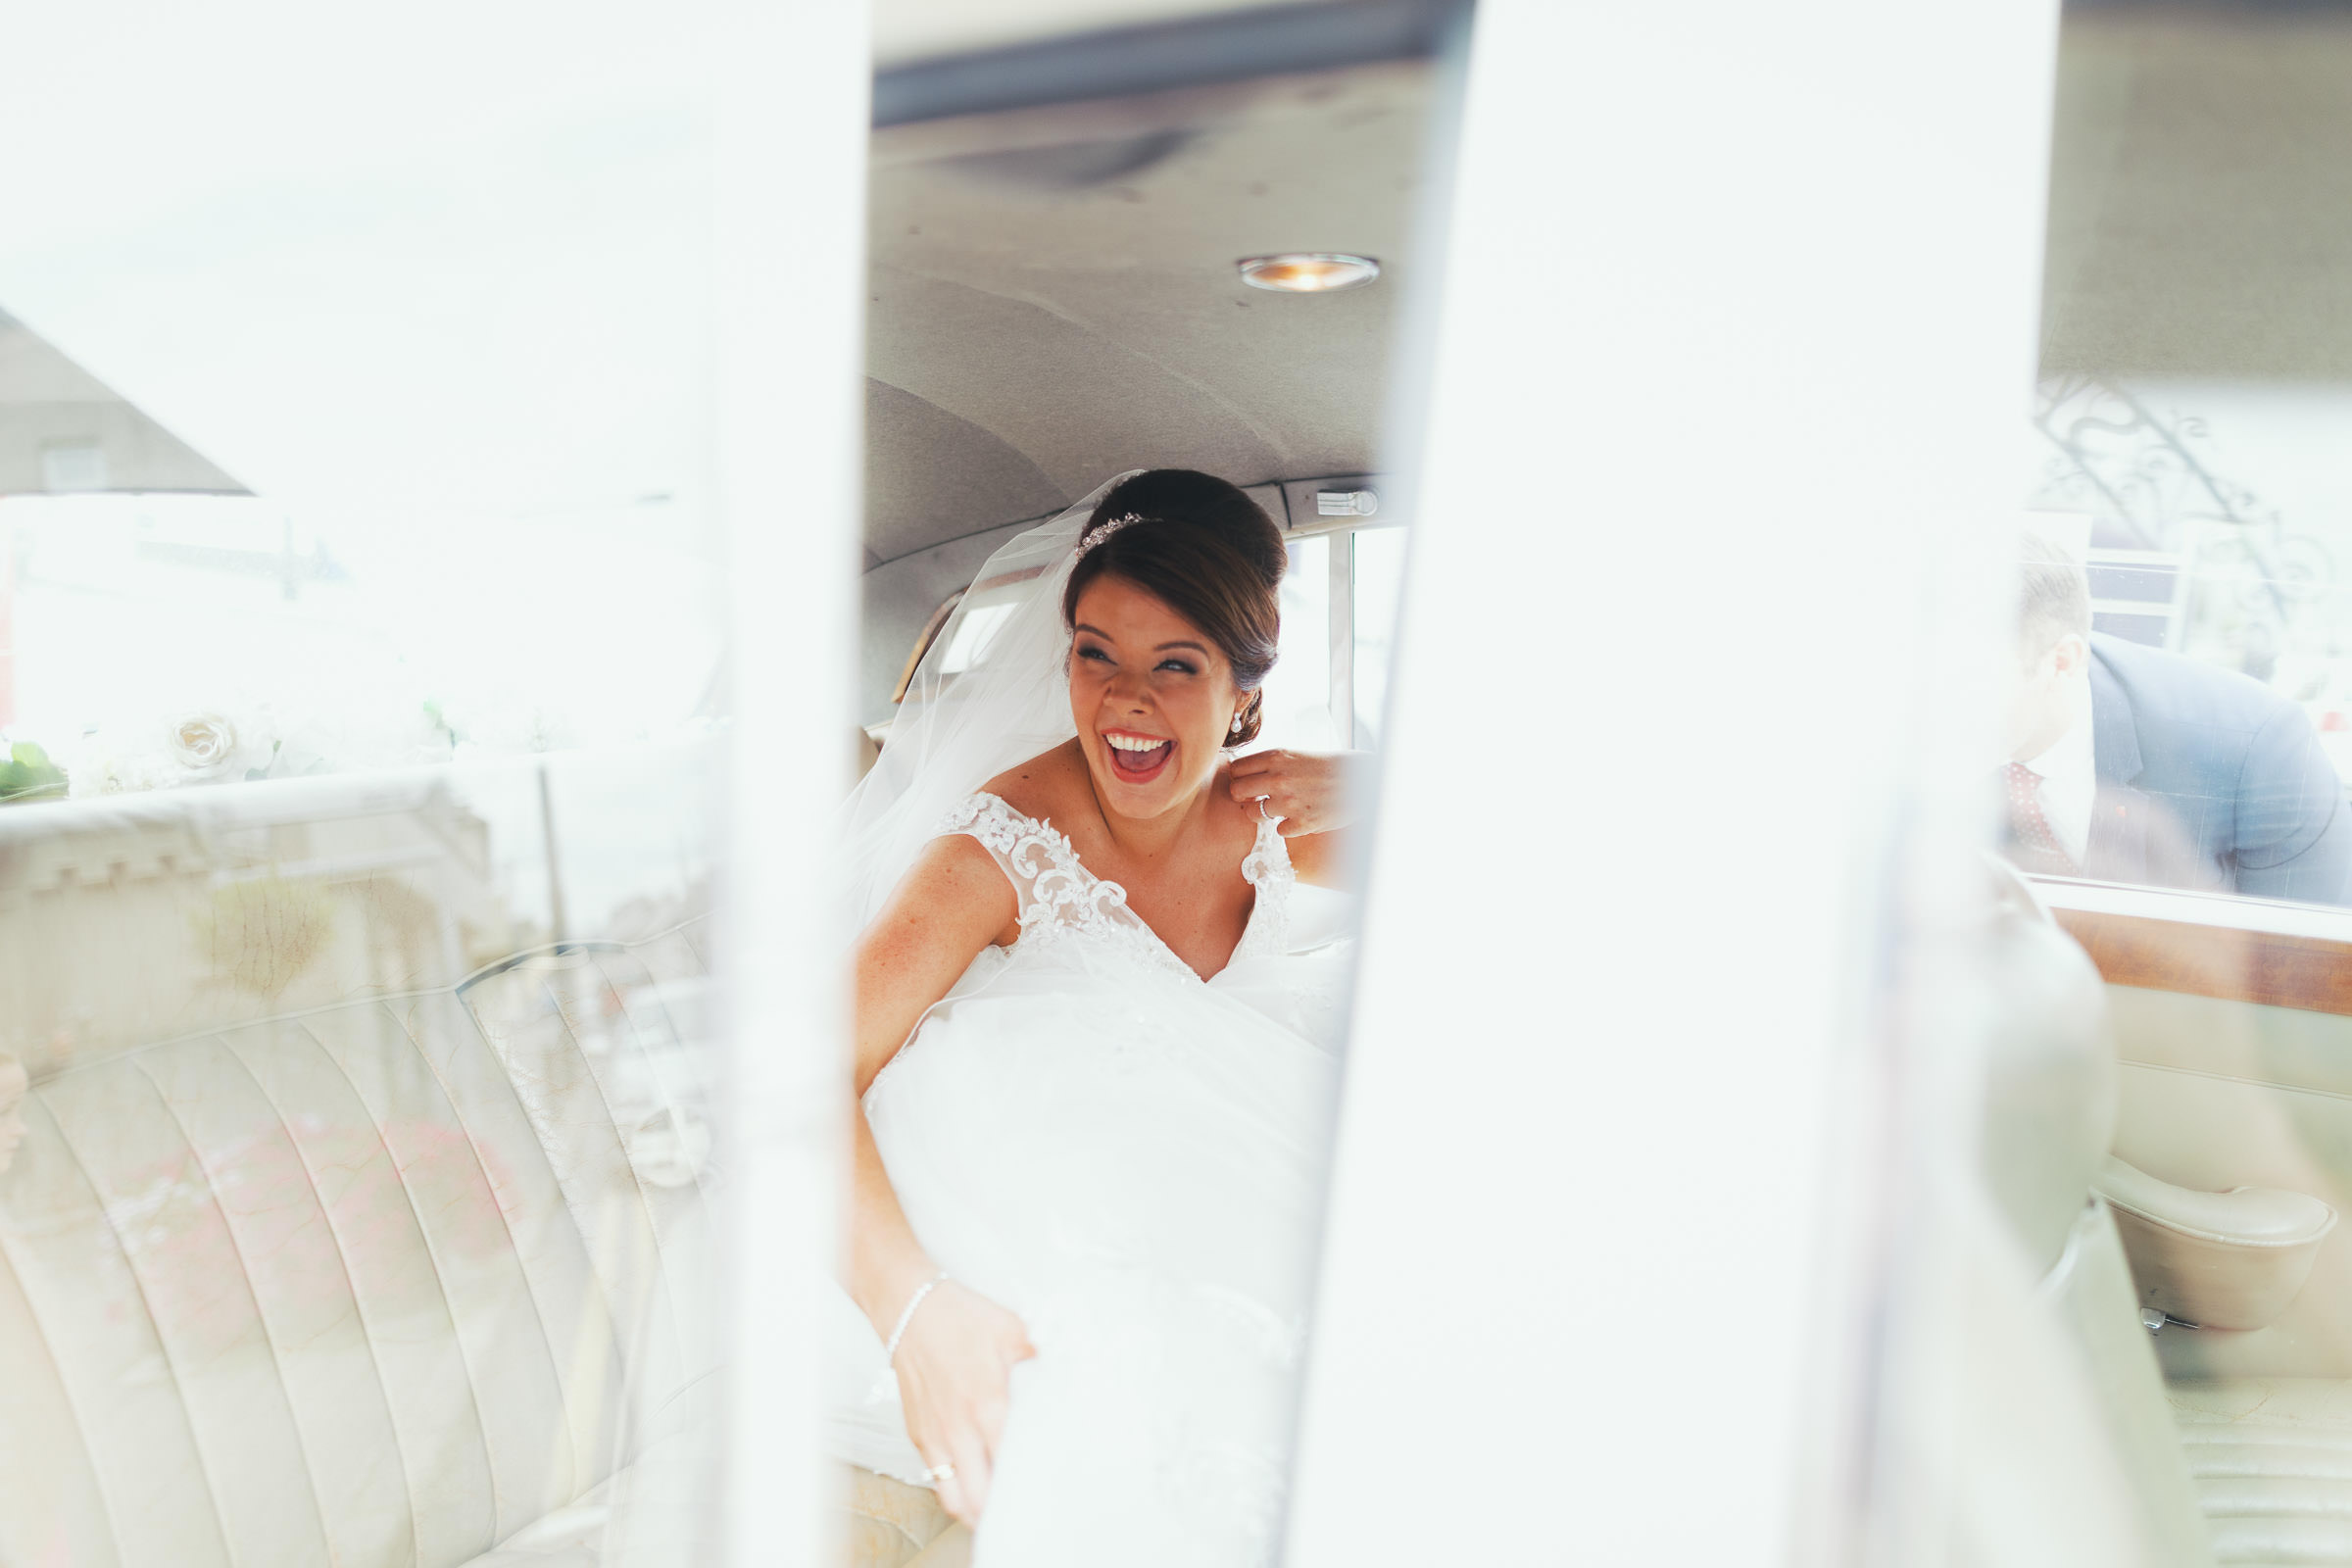 View through the car door of the bride laughing after her wedding.